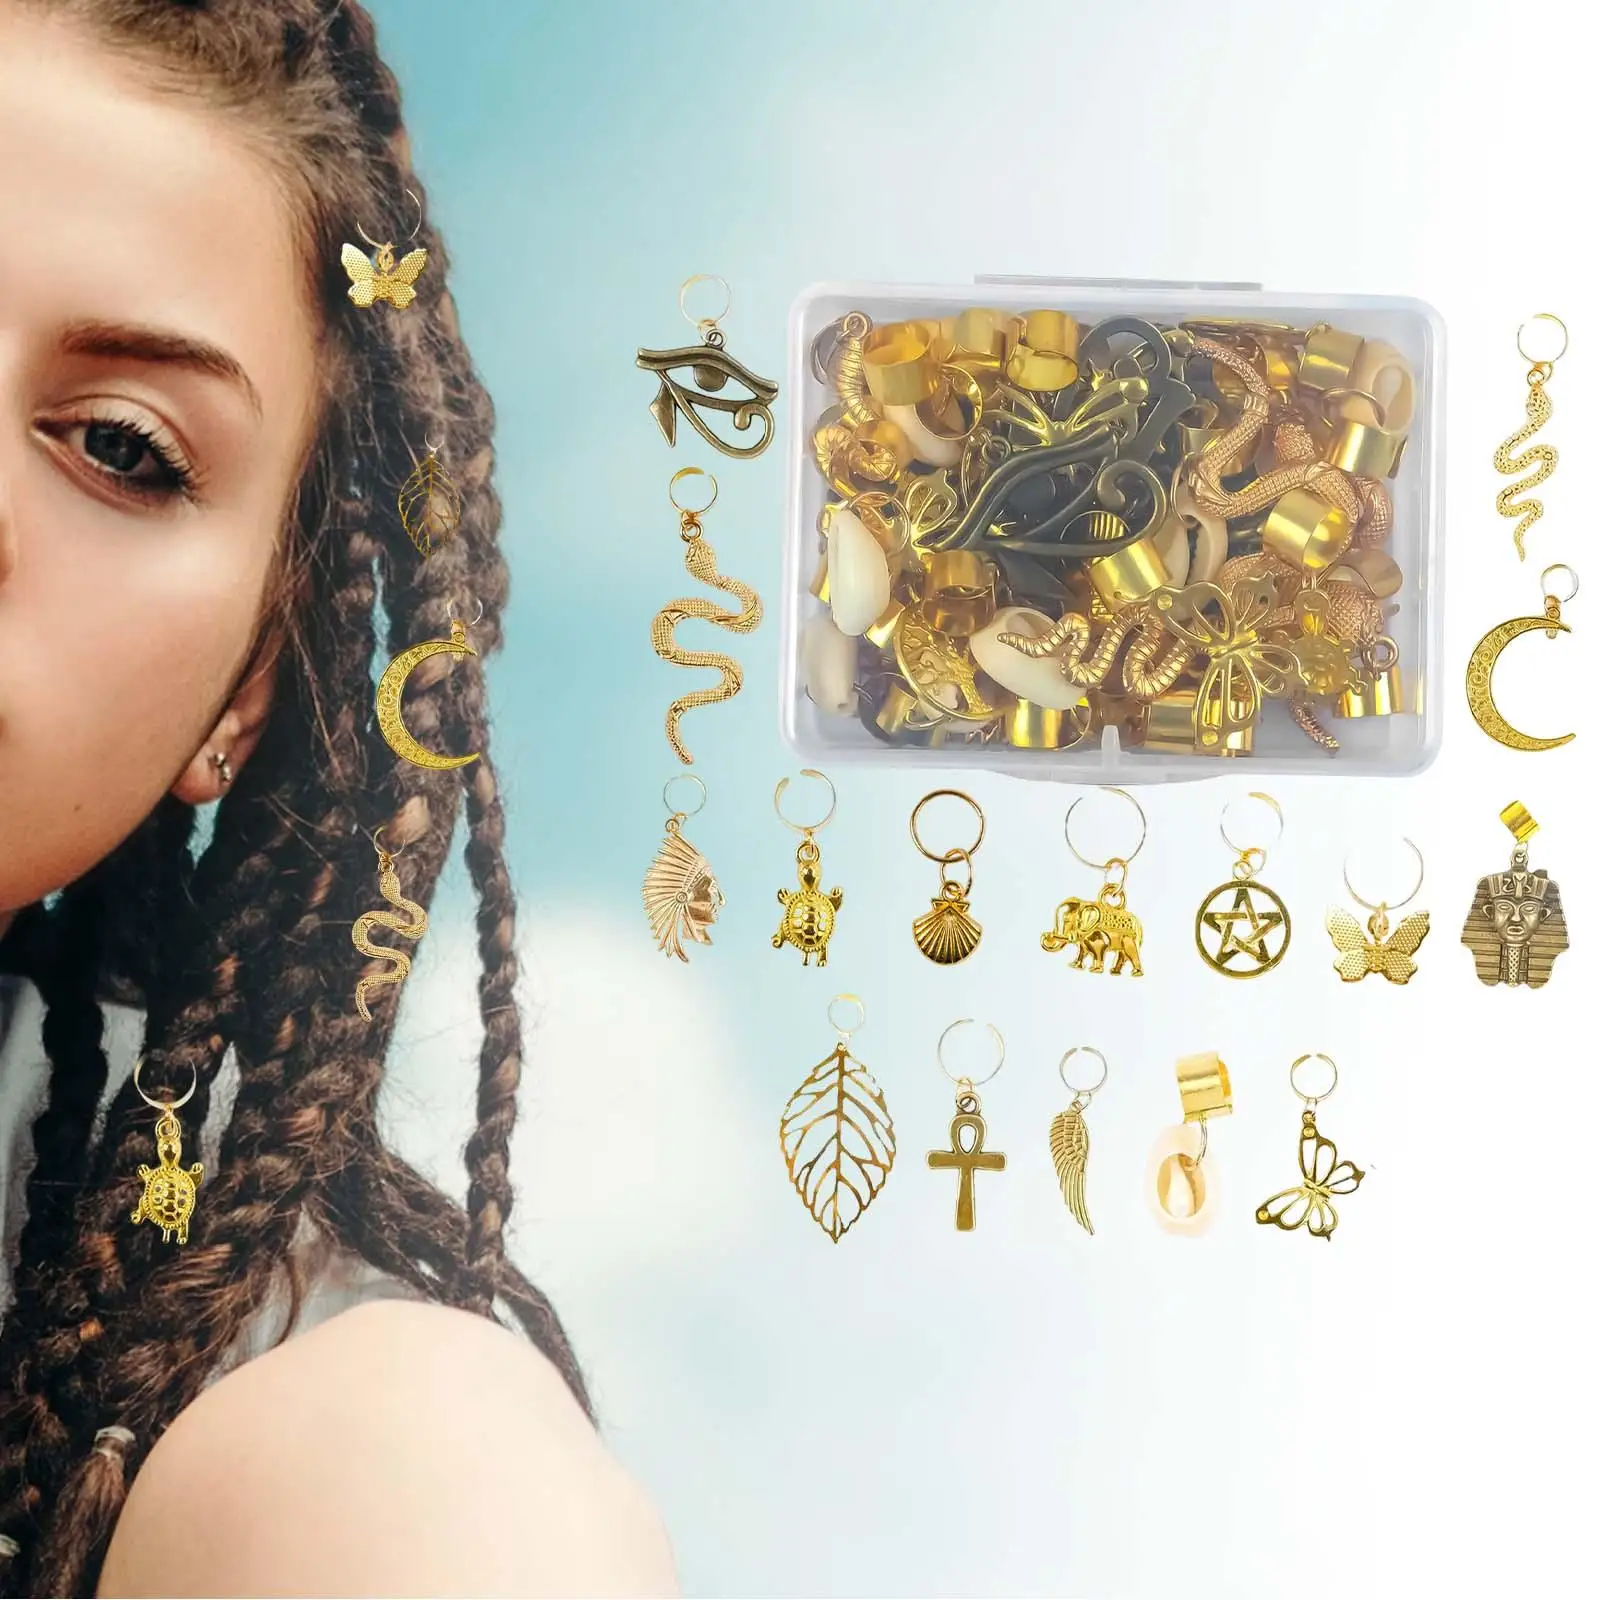 40 Pieces Multicolor jewelry Flexible Hair Accessories Decoration Pendants Dreadlocks Beads for Party Fashion Show Earrings